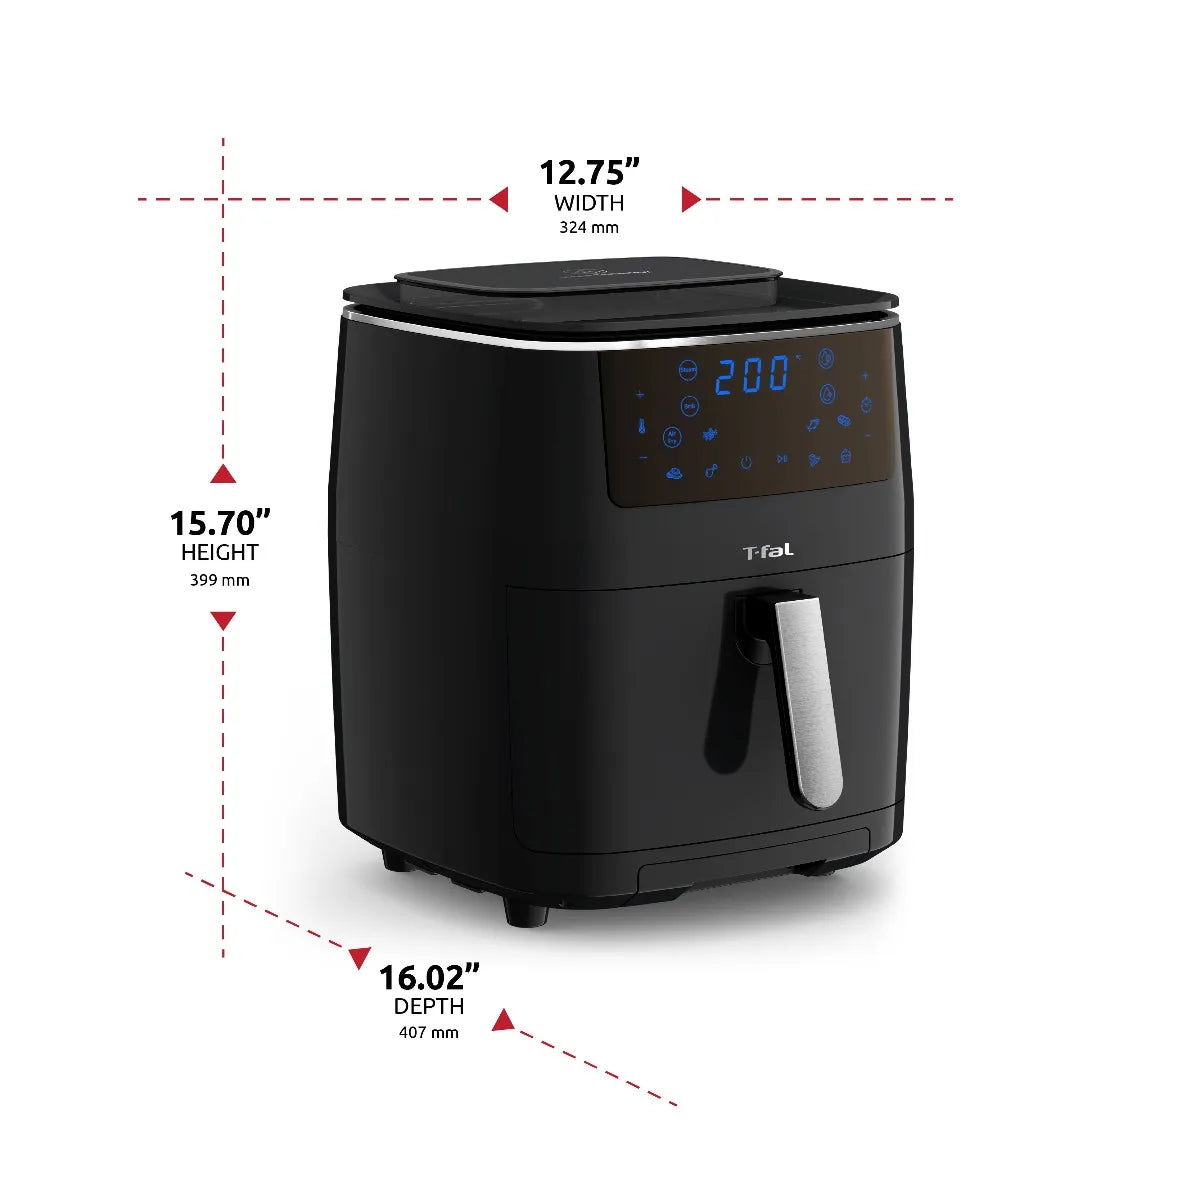 T-fal Easy Fry Grill & Steam Large Air Fryer